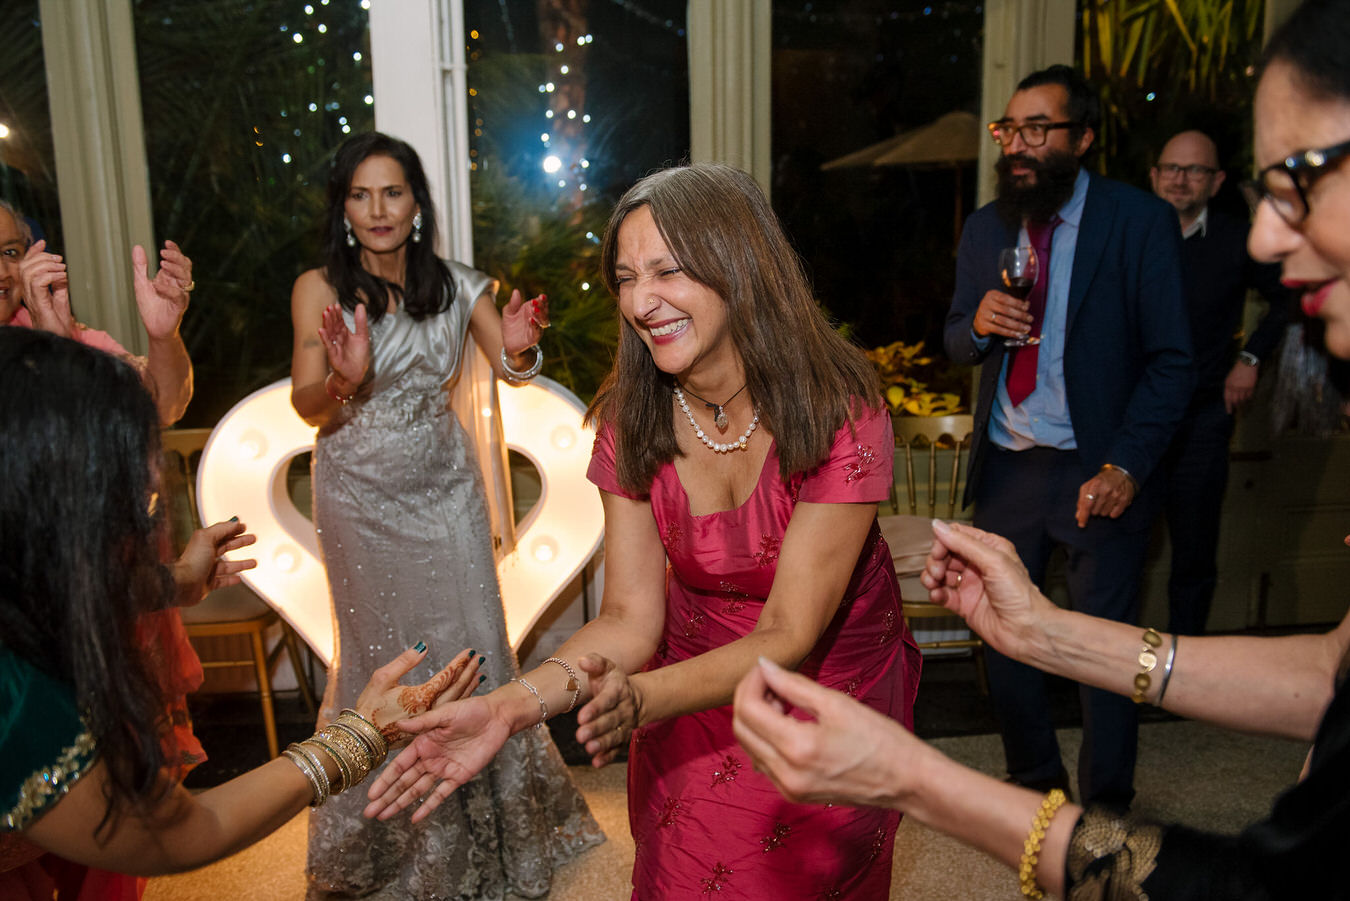 Wedding guests are clapping hands in the rhythm of the Asian music and dance.